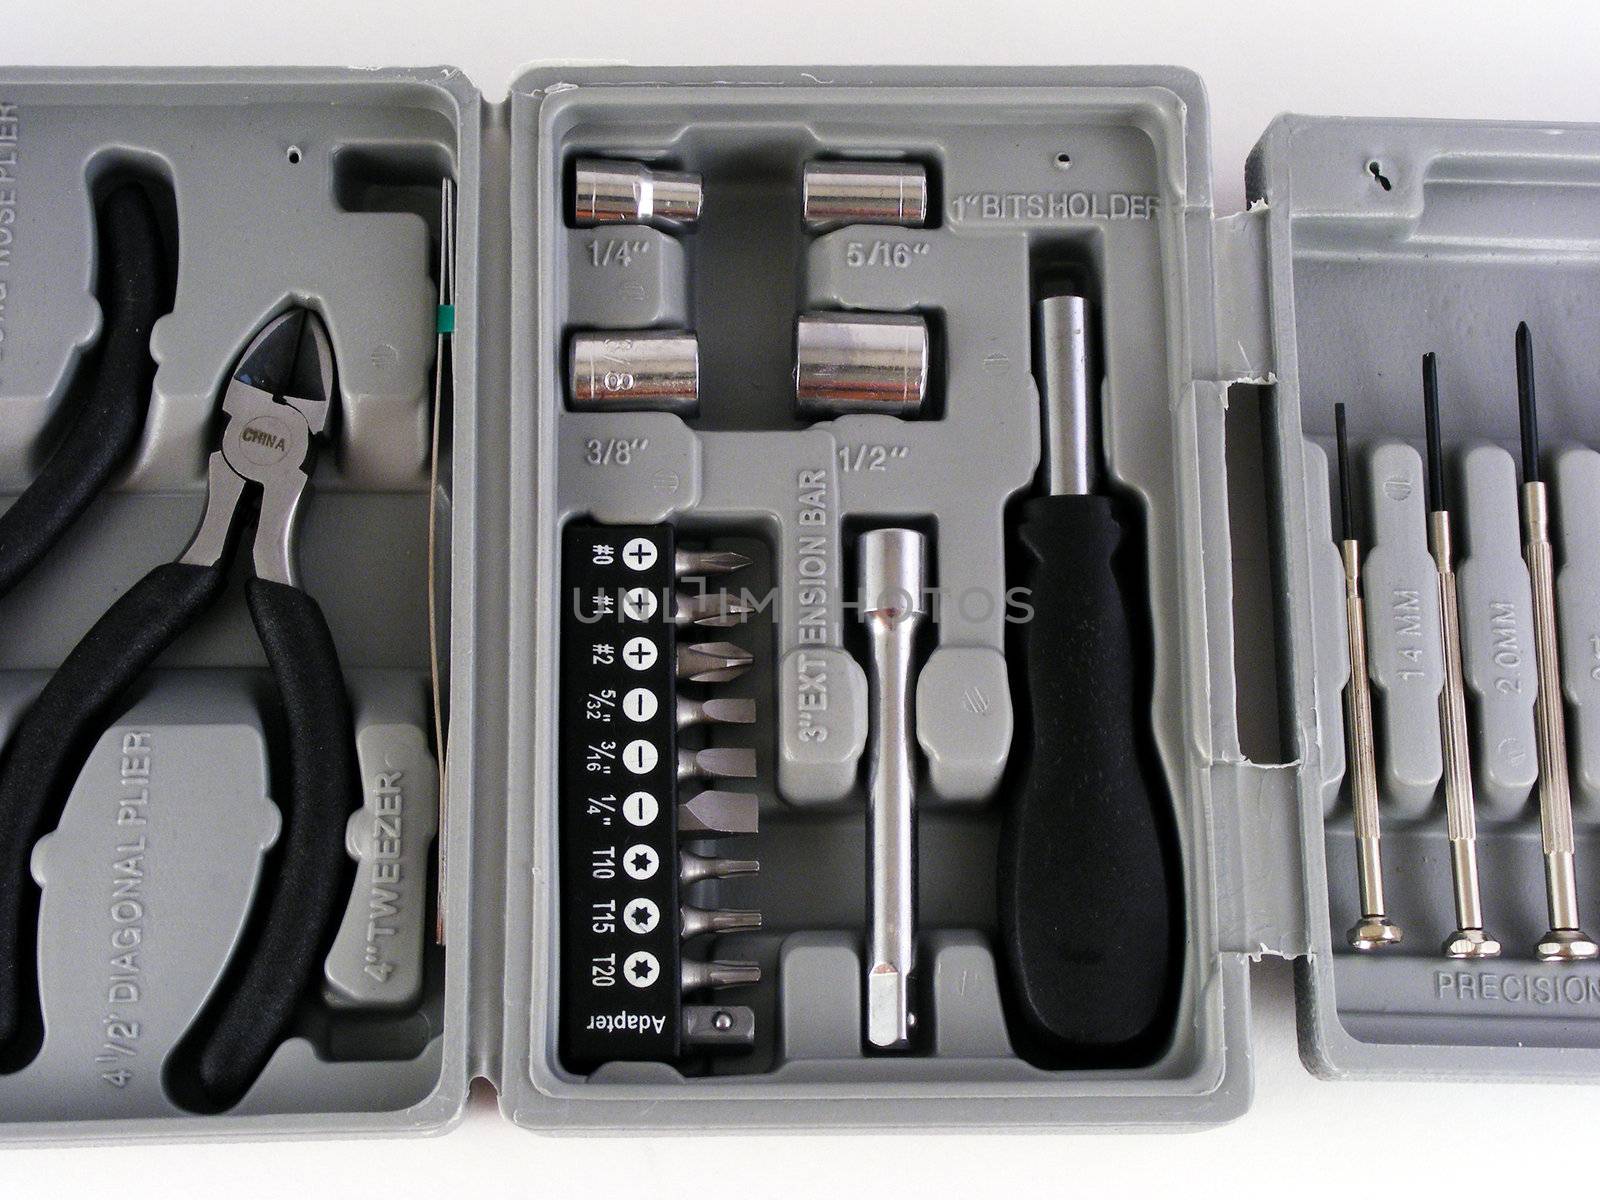 Part of a small toolkit for do it yourself home repairs which includes screwdrivers and pliers.